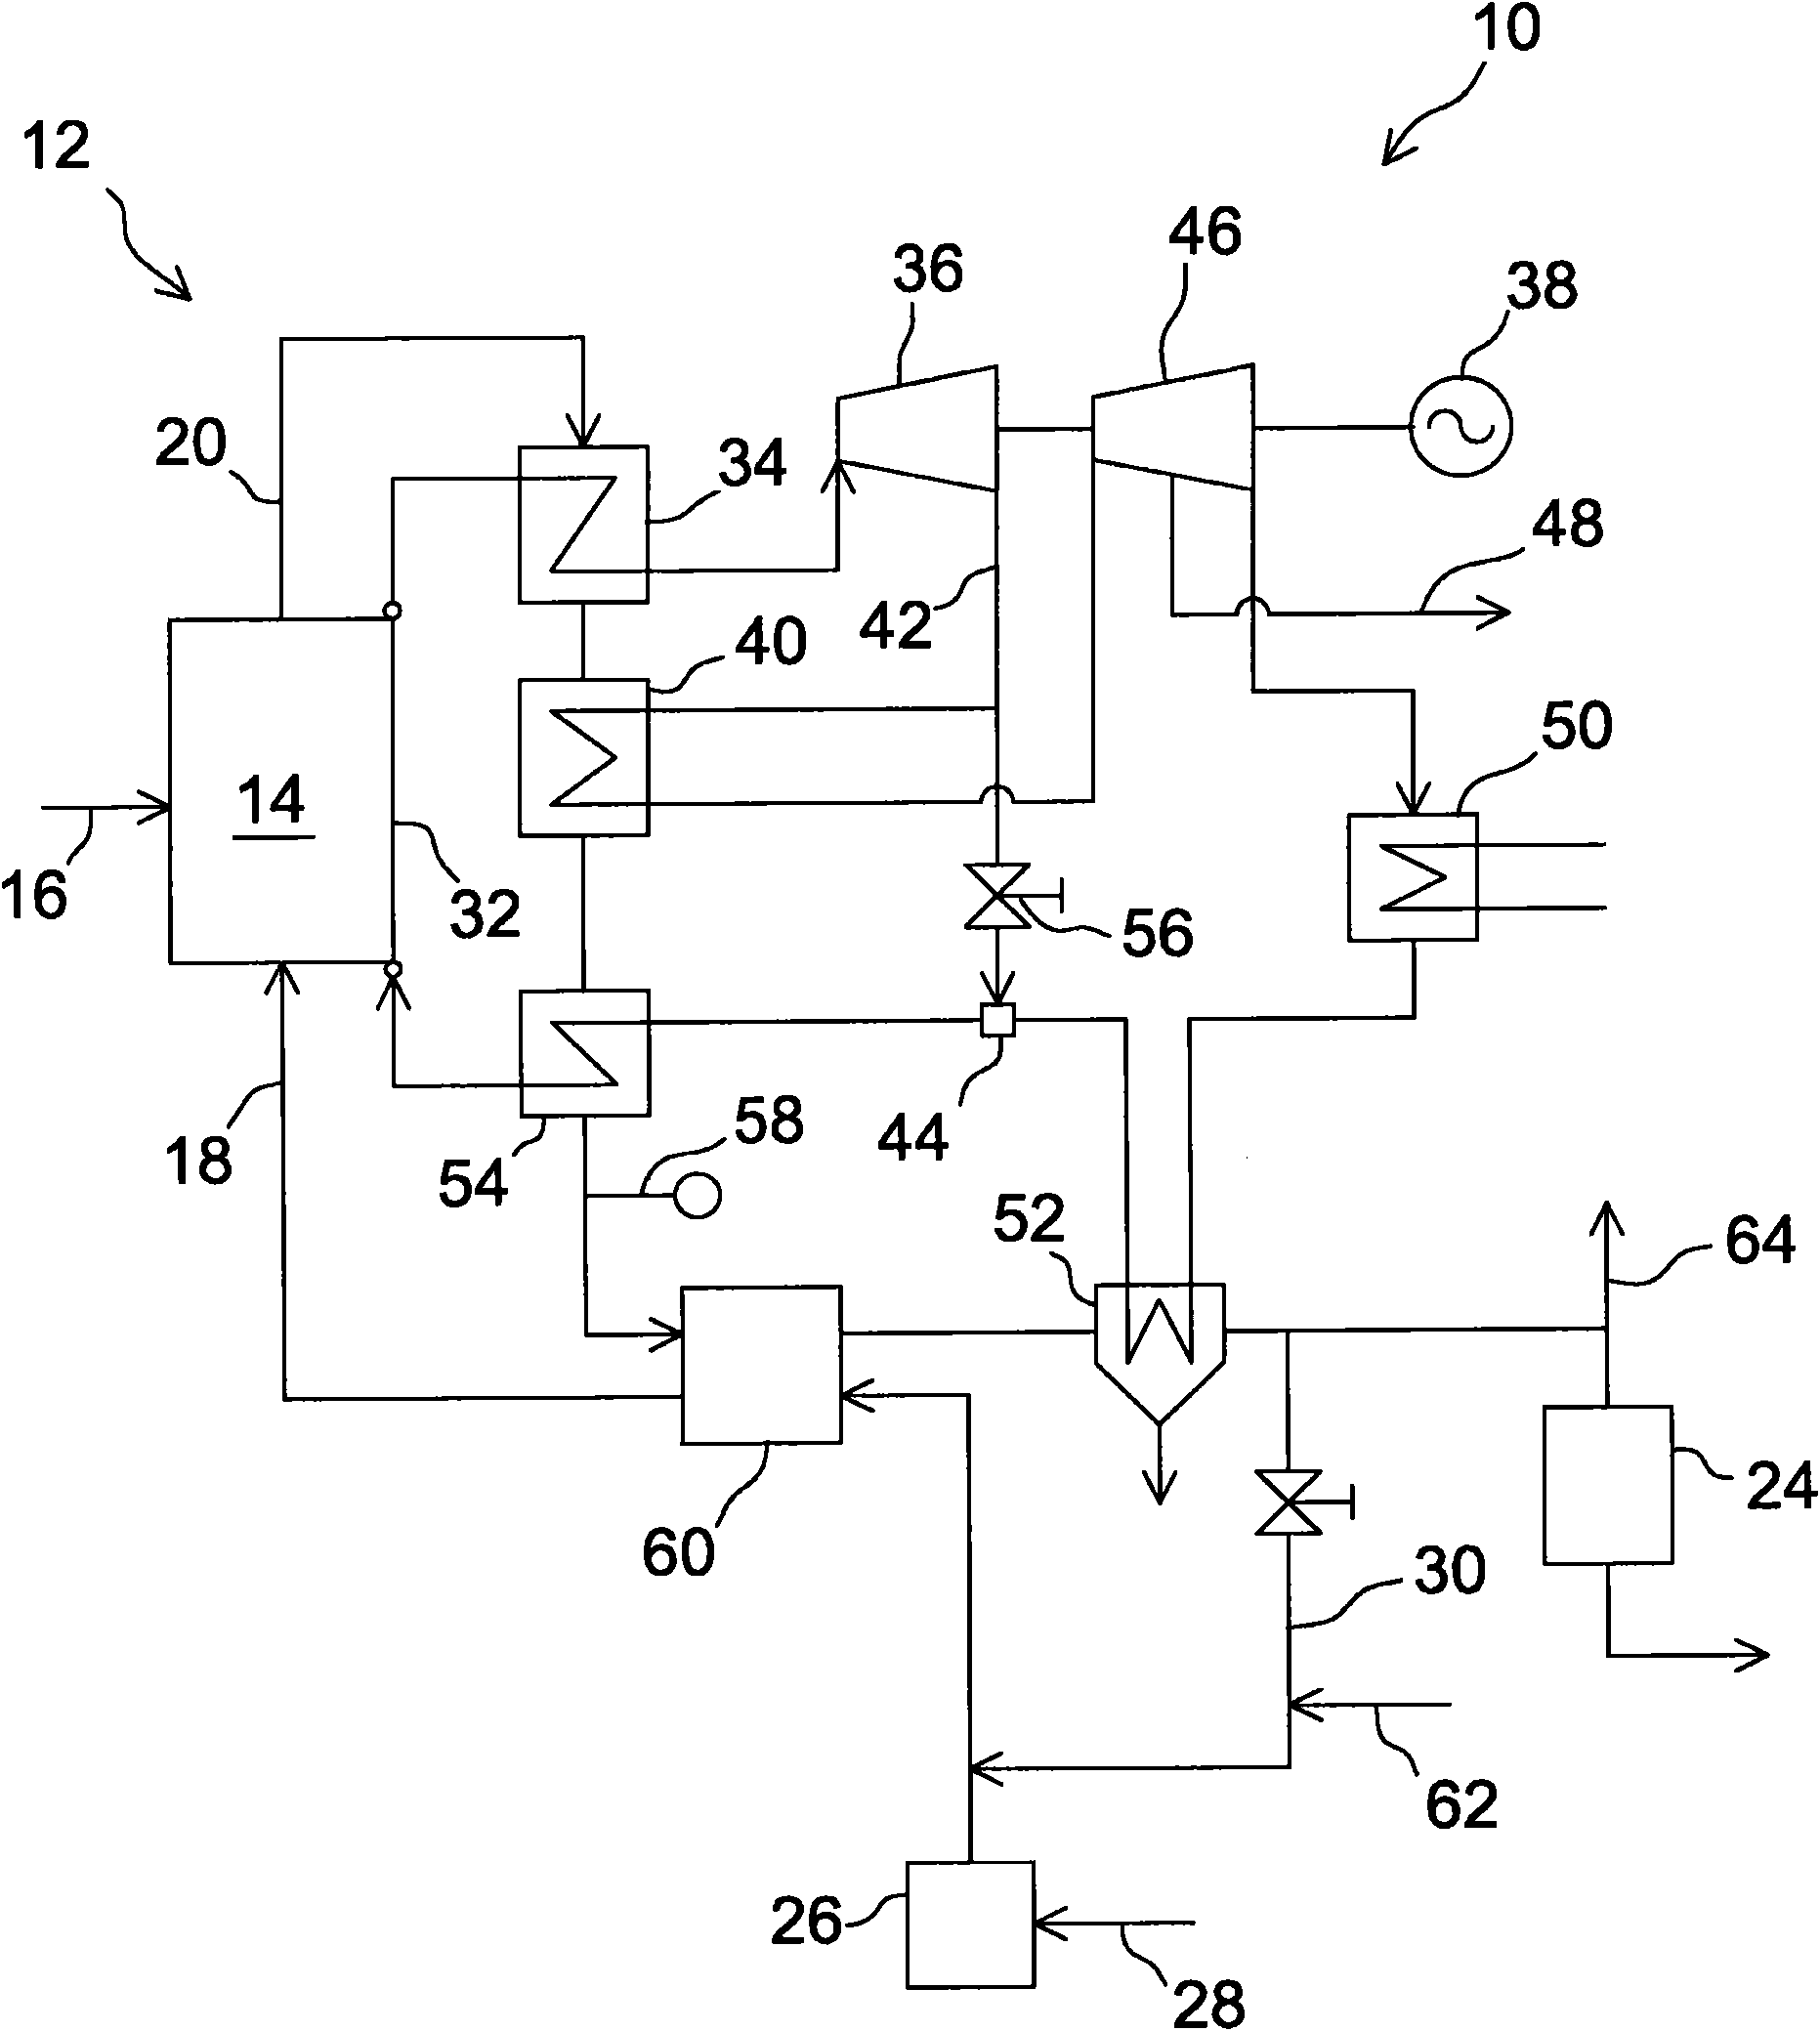 Oxyfuel combusting boiler system and a method of generating power by using the boiler system